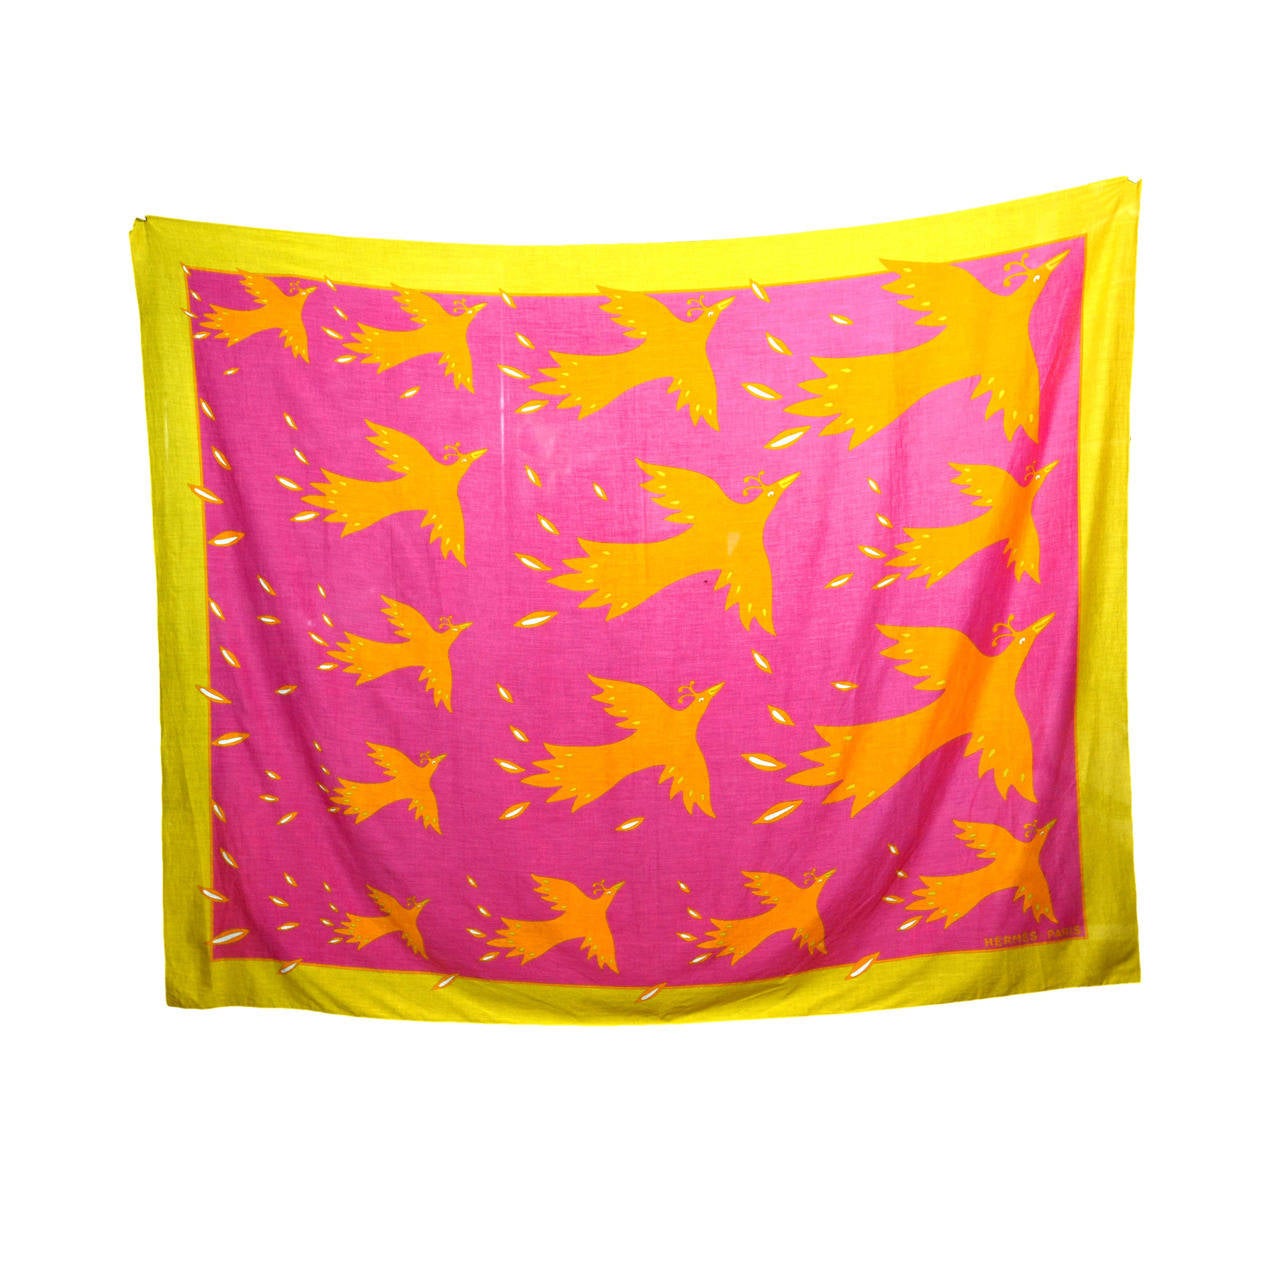 HERMES Pink and Yellow Flying Bird Print Scarf